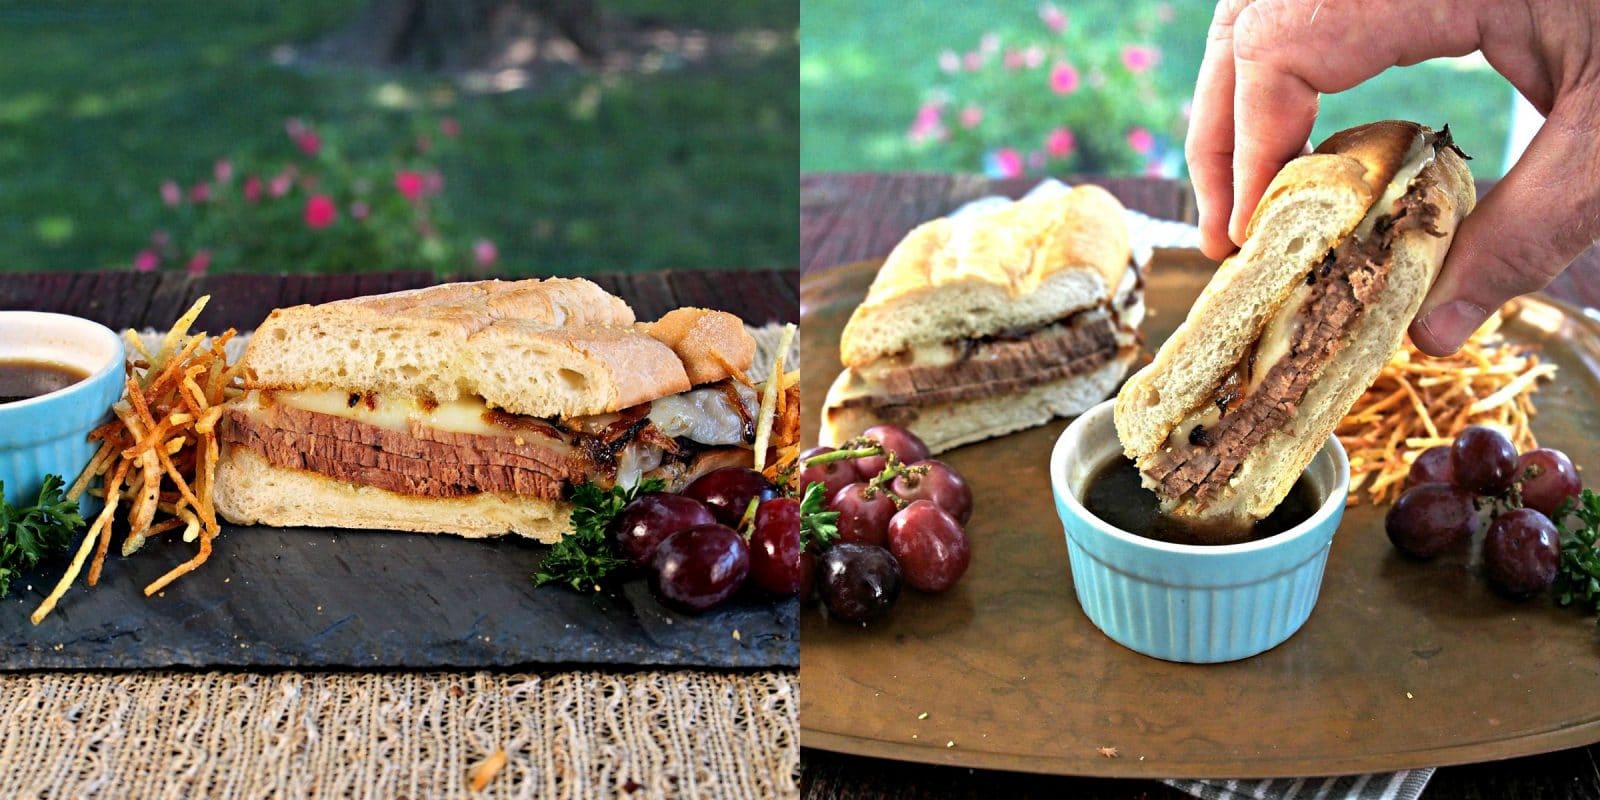 Easy French Dip Sandwiches. Slow-cooked w/seasoned beef broth until tender. Served with melted cheese & crispy shallots on buttered, toasted buns w/au jus. Simply Sated